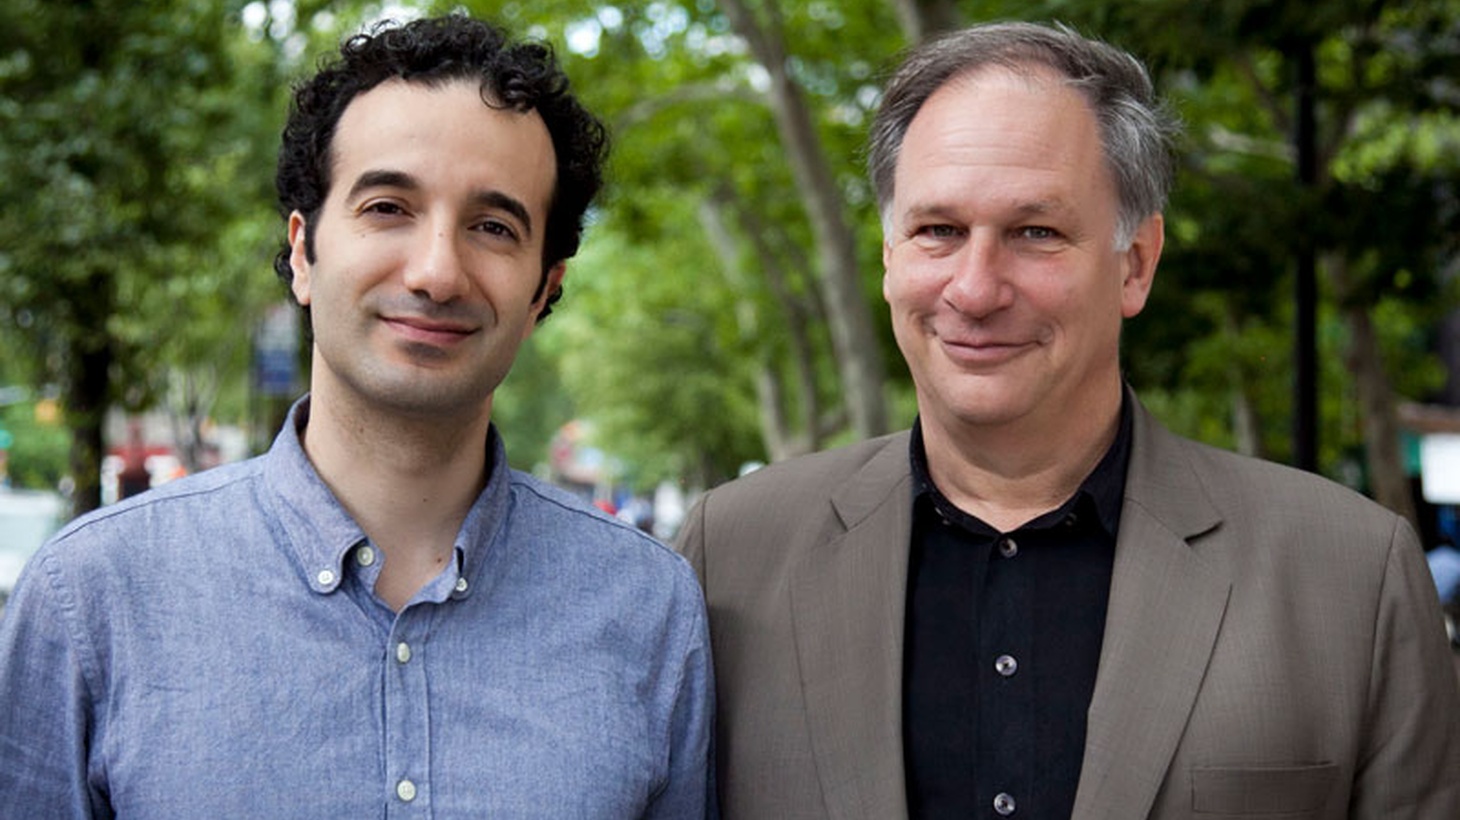 Radiolab examines the chemical consequences of belief and imagination.